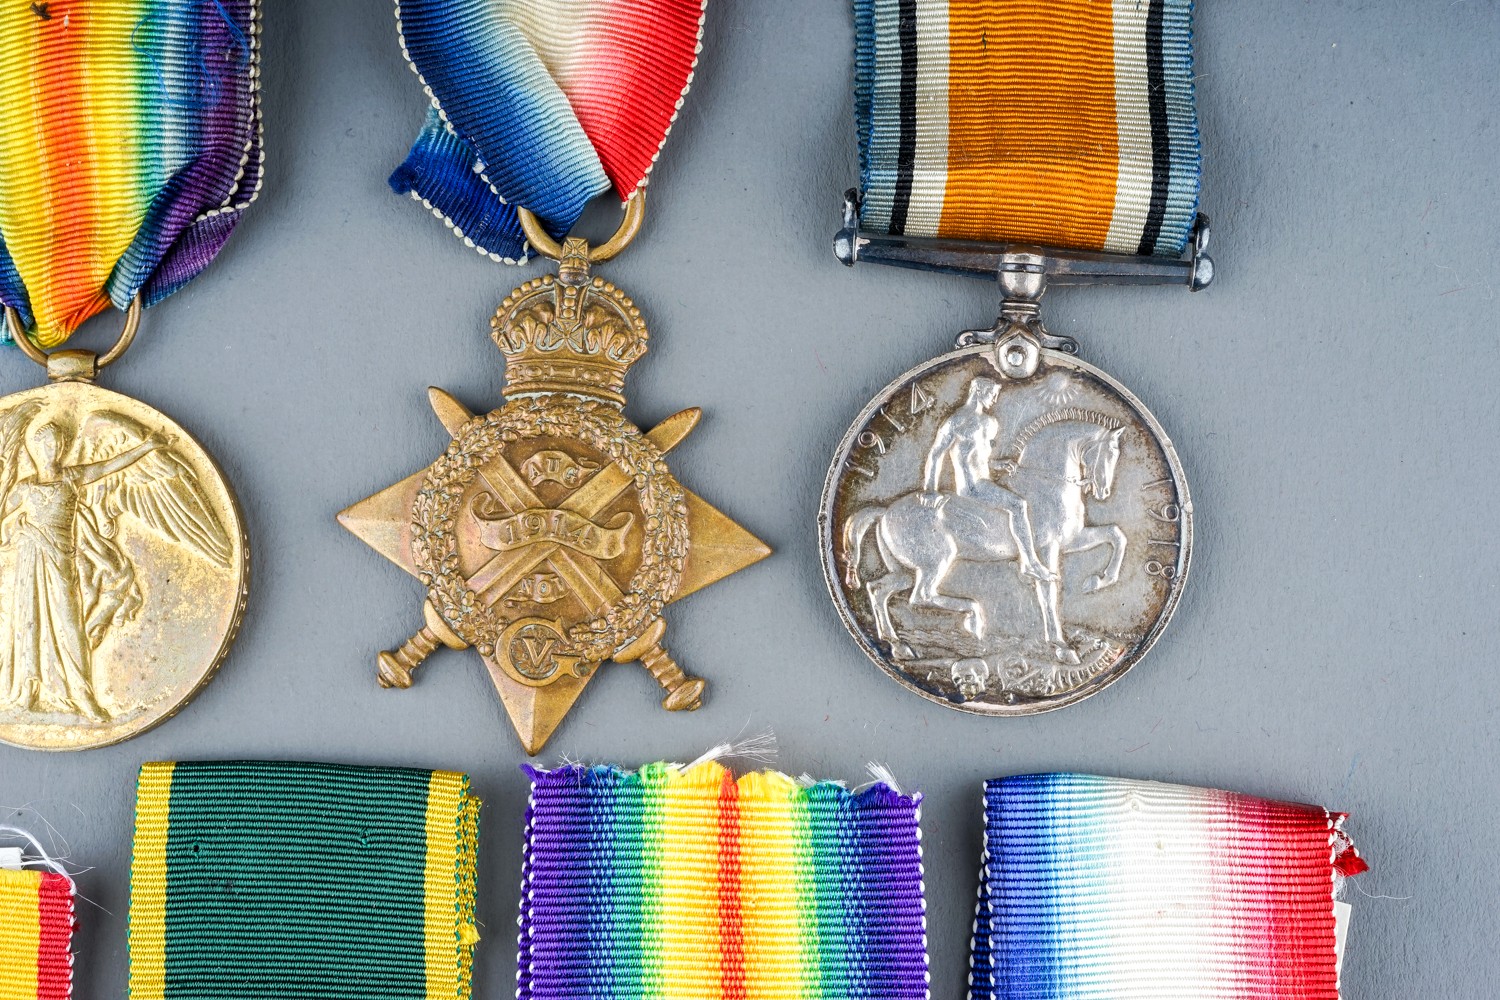 A collection of British Medals. Great War Pair - R-29124 A Cpl H H Simpkins K R Rif C. Condition - Image 10 of 12